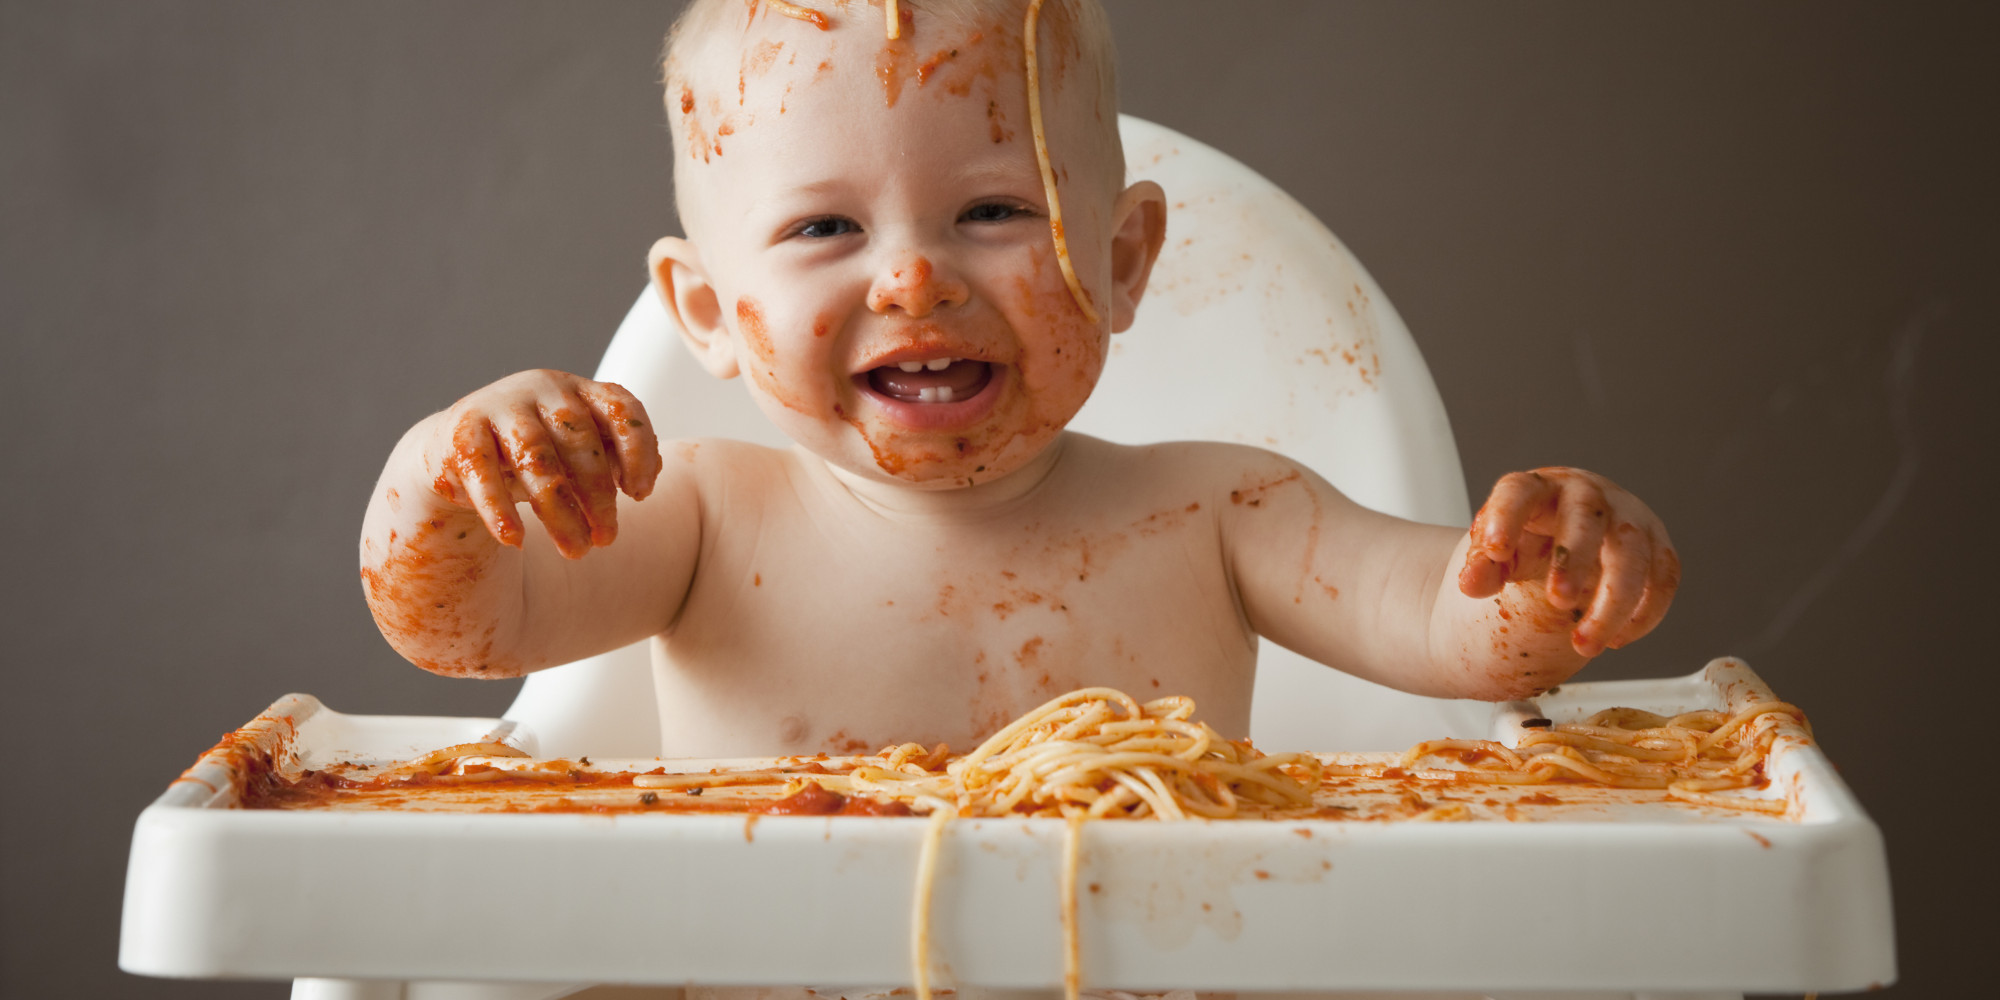 Messy Kids Who Play With Their Food May Be Faster Learners, Study ...